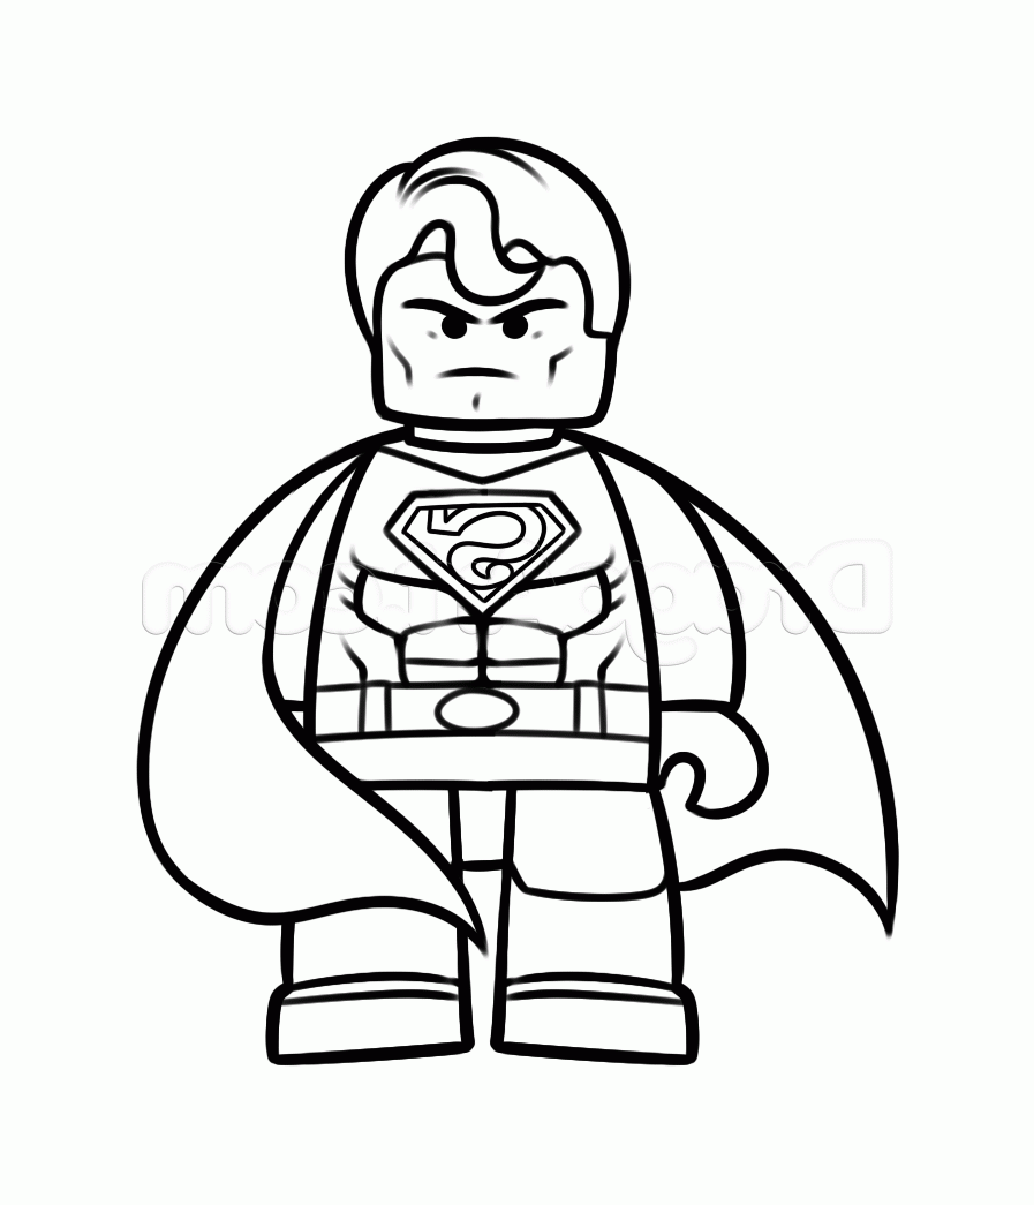 Lego Superman Coloring Page   Coloring Home